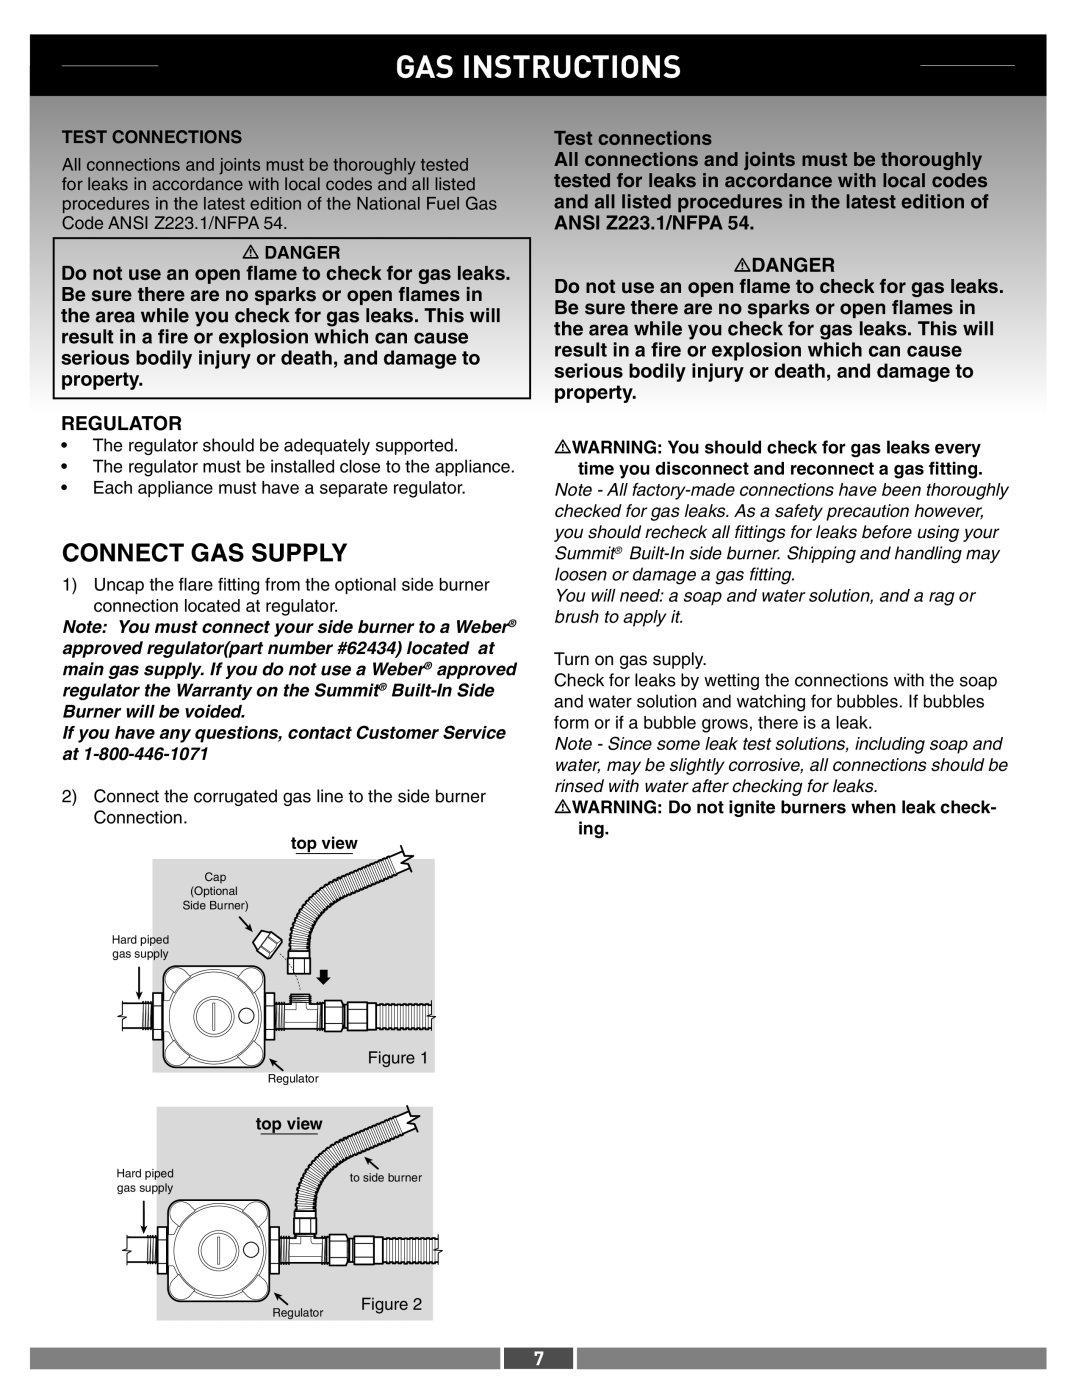 Weber 42377 manual Connect Gas Supply, Regulator, Gas Instructions, Test connections, Danger 